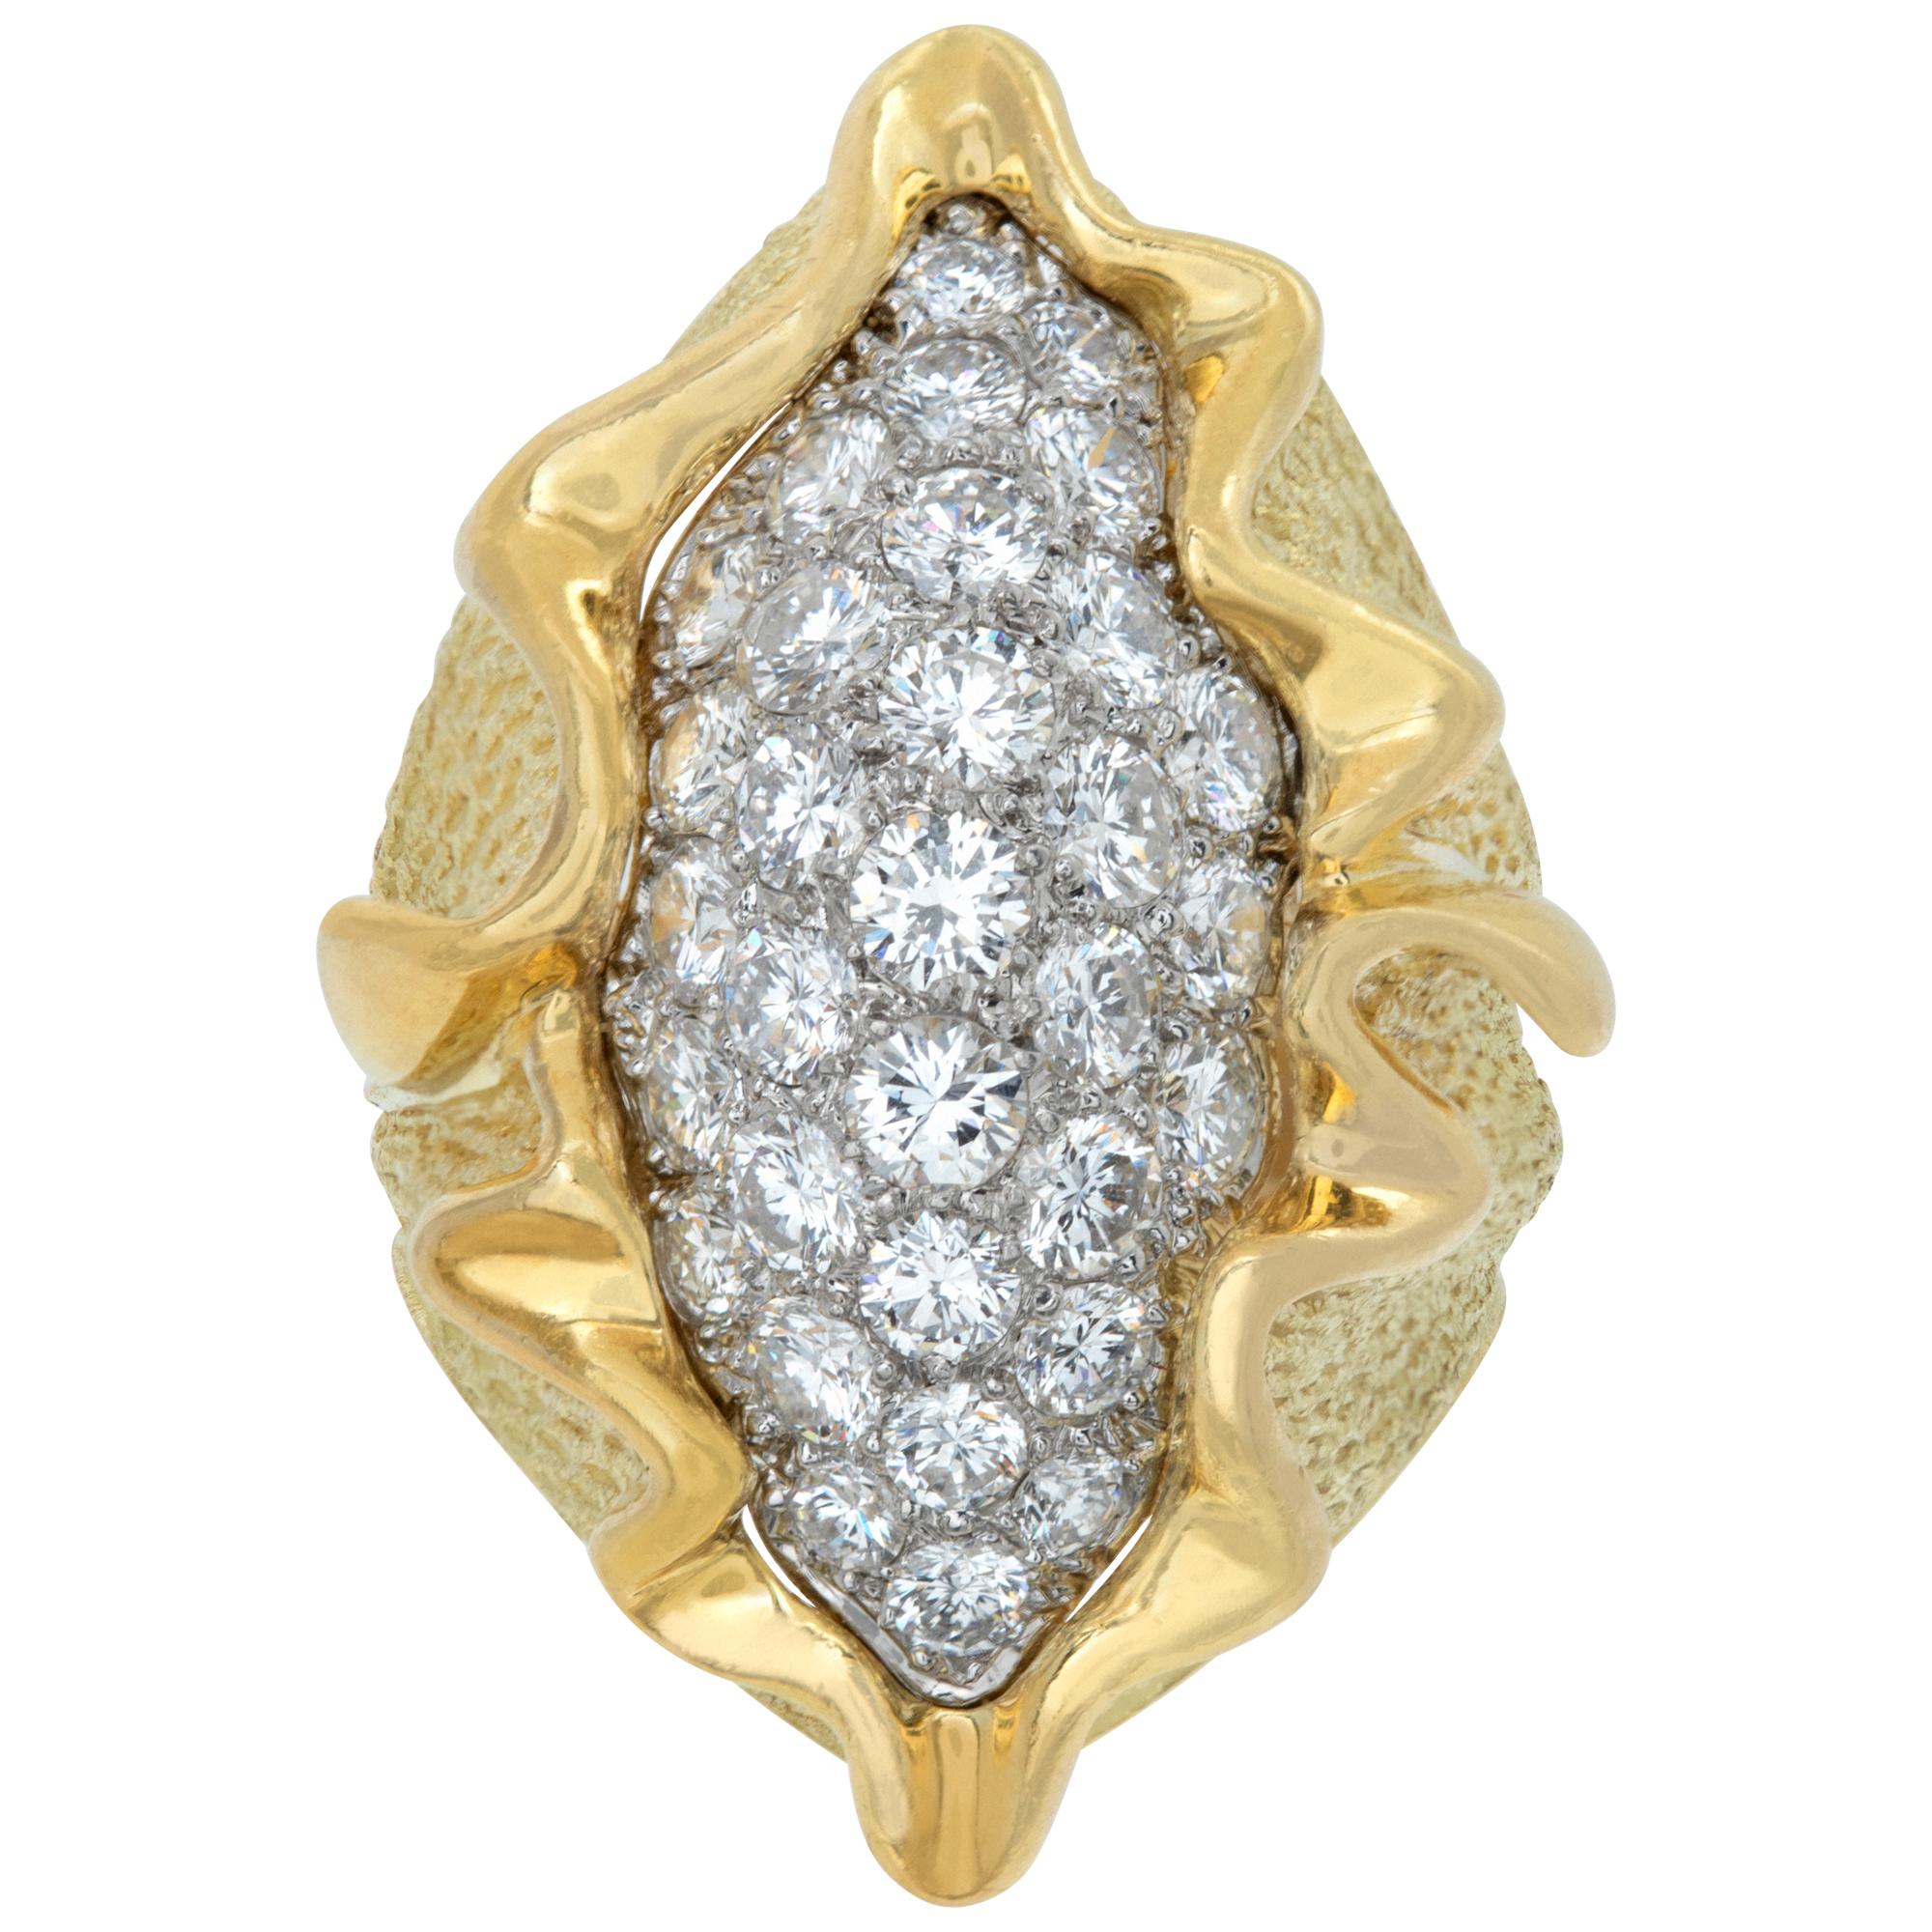 Wave ring with over 2.00 carats  round brilliant cut diamonds set in 18k yellow and white gold. High quality honeycomb gallery on inside. Customer states it was purchased at Piaget and the markings were removed while sizing. Comes with Piaget ring